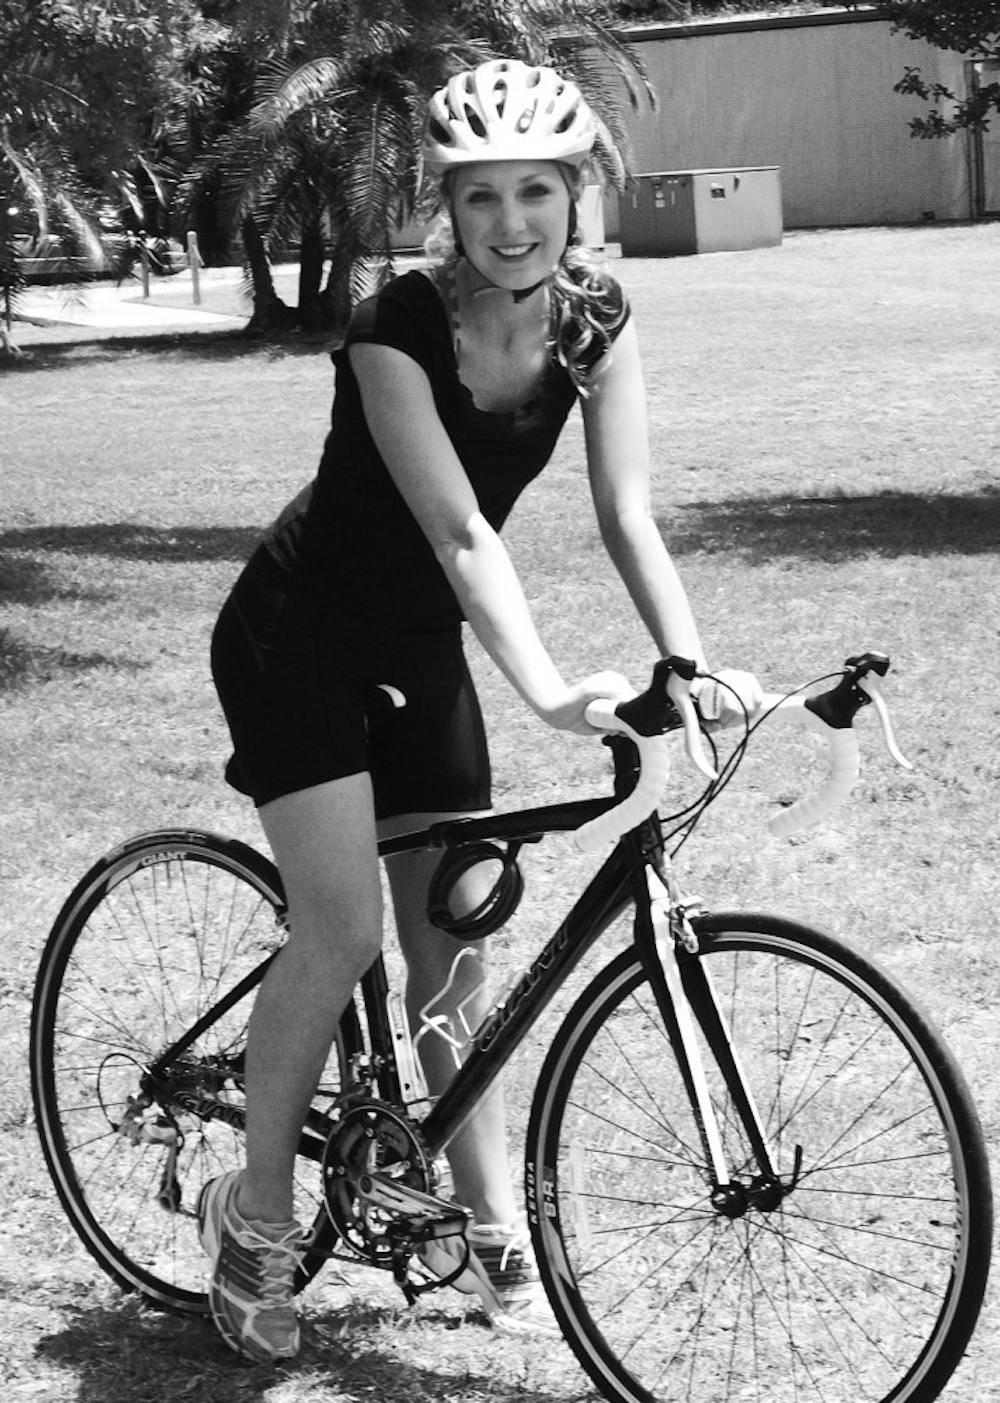 Grace Tidwell, a 2010 UF graduate, poses on a bicycle. Tidwell will be biking North Carolina to California, with Bike and Build, a nonprofit organization that builds affordable housing.